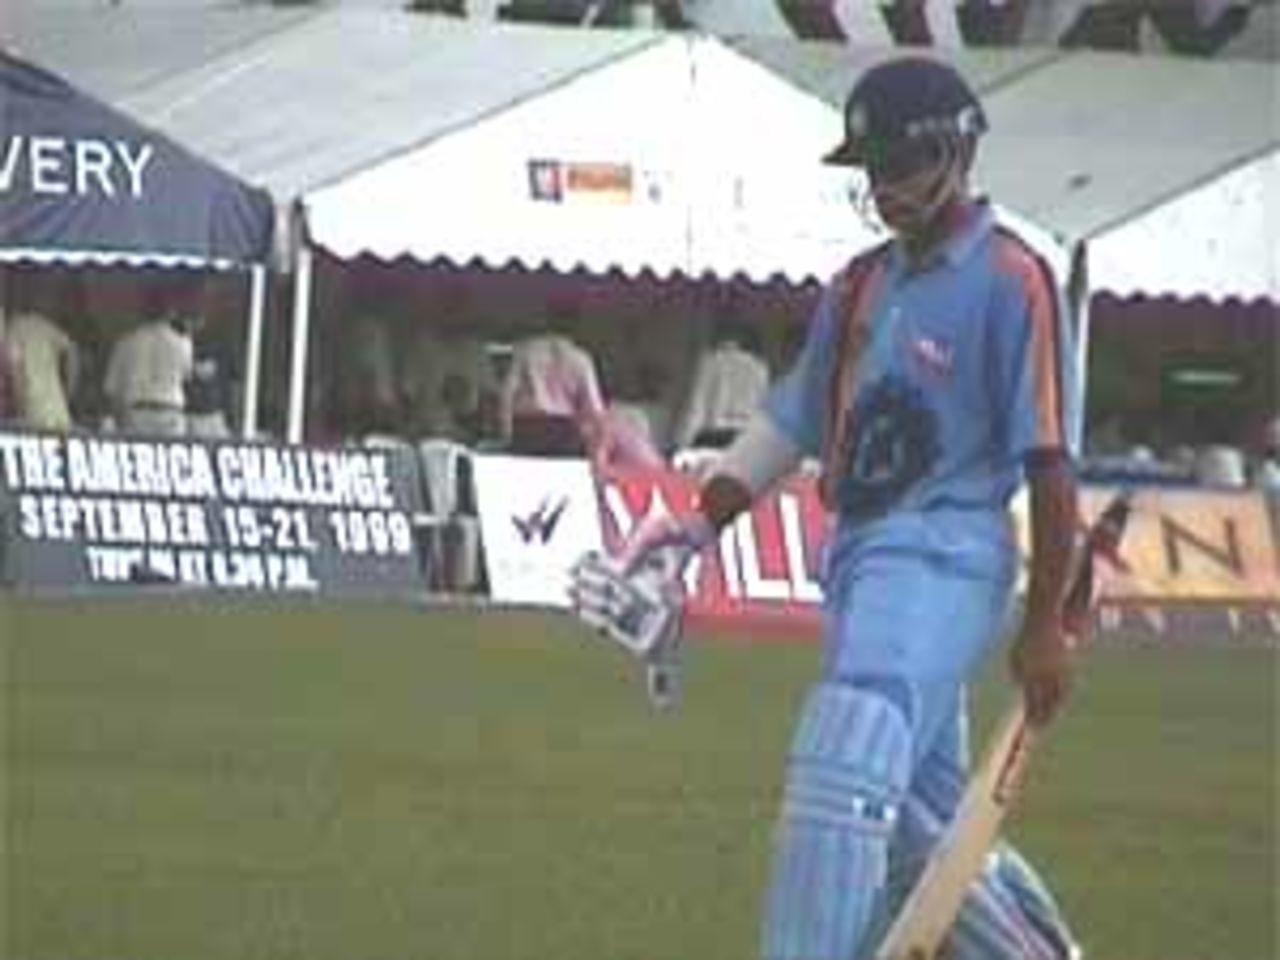 Dejected Ganguly walks back after being tragically run-out, India v West Indies (Final), Coca-Cola Singapore Challenge, 1999-2000, Kallang Ground, Singapore, 7 Sep 1999.